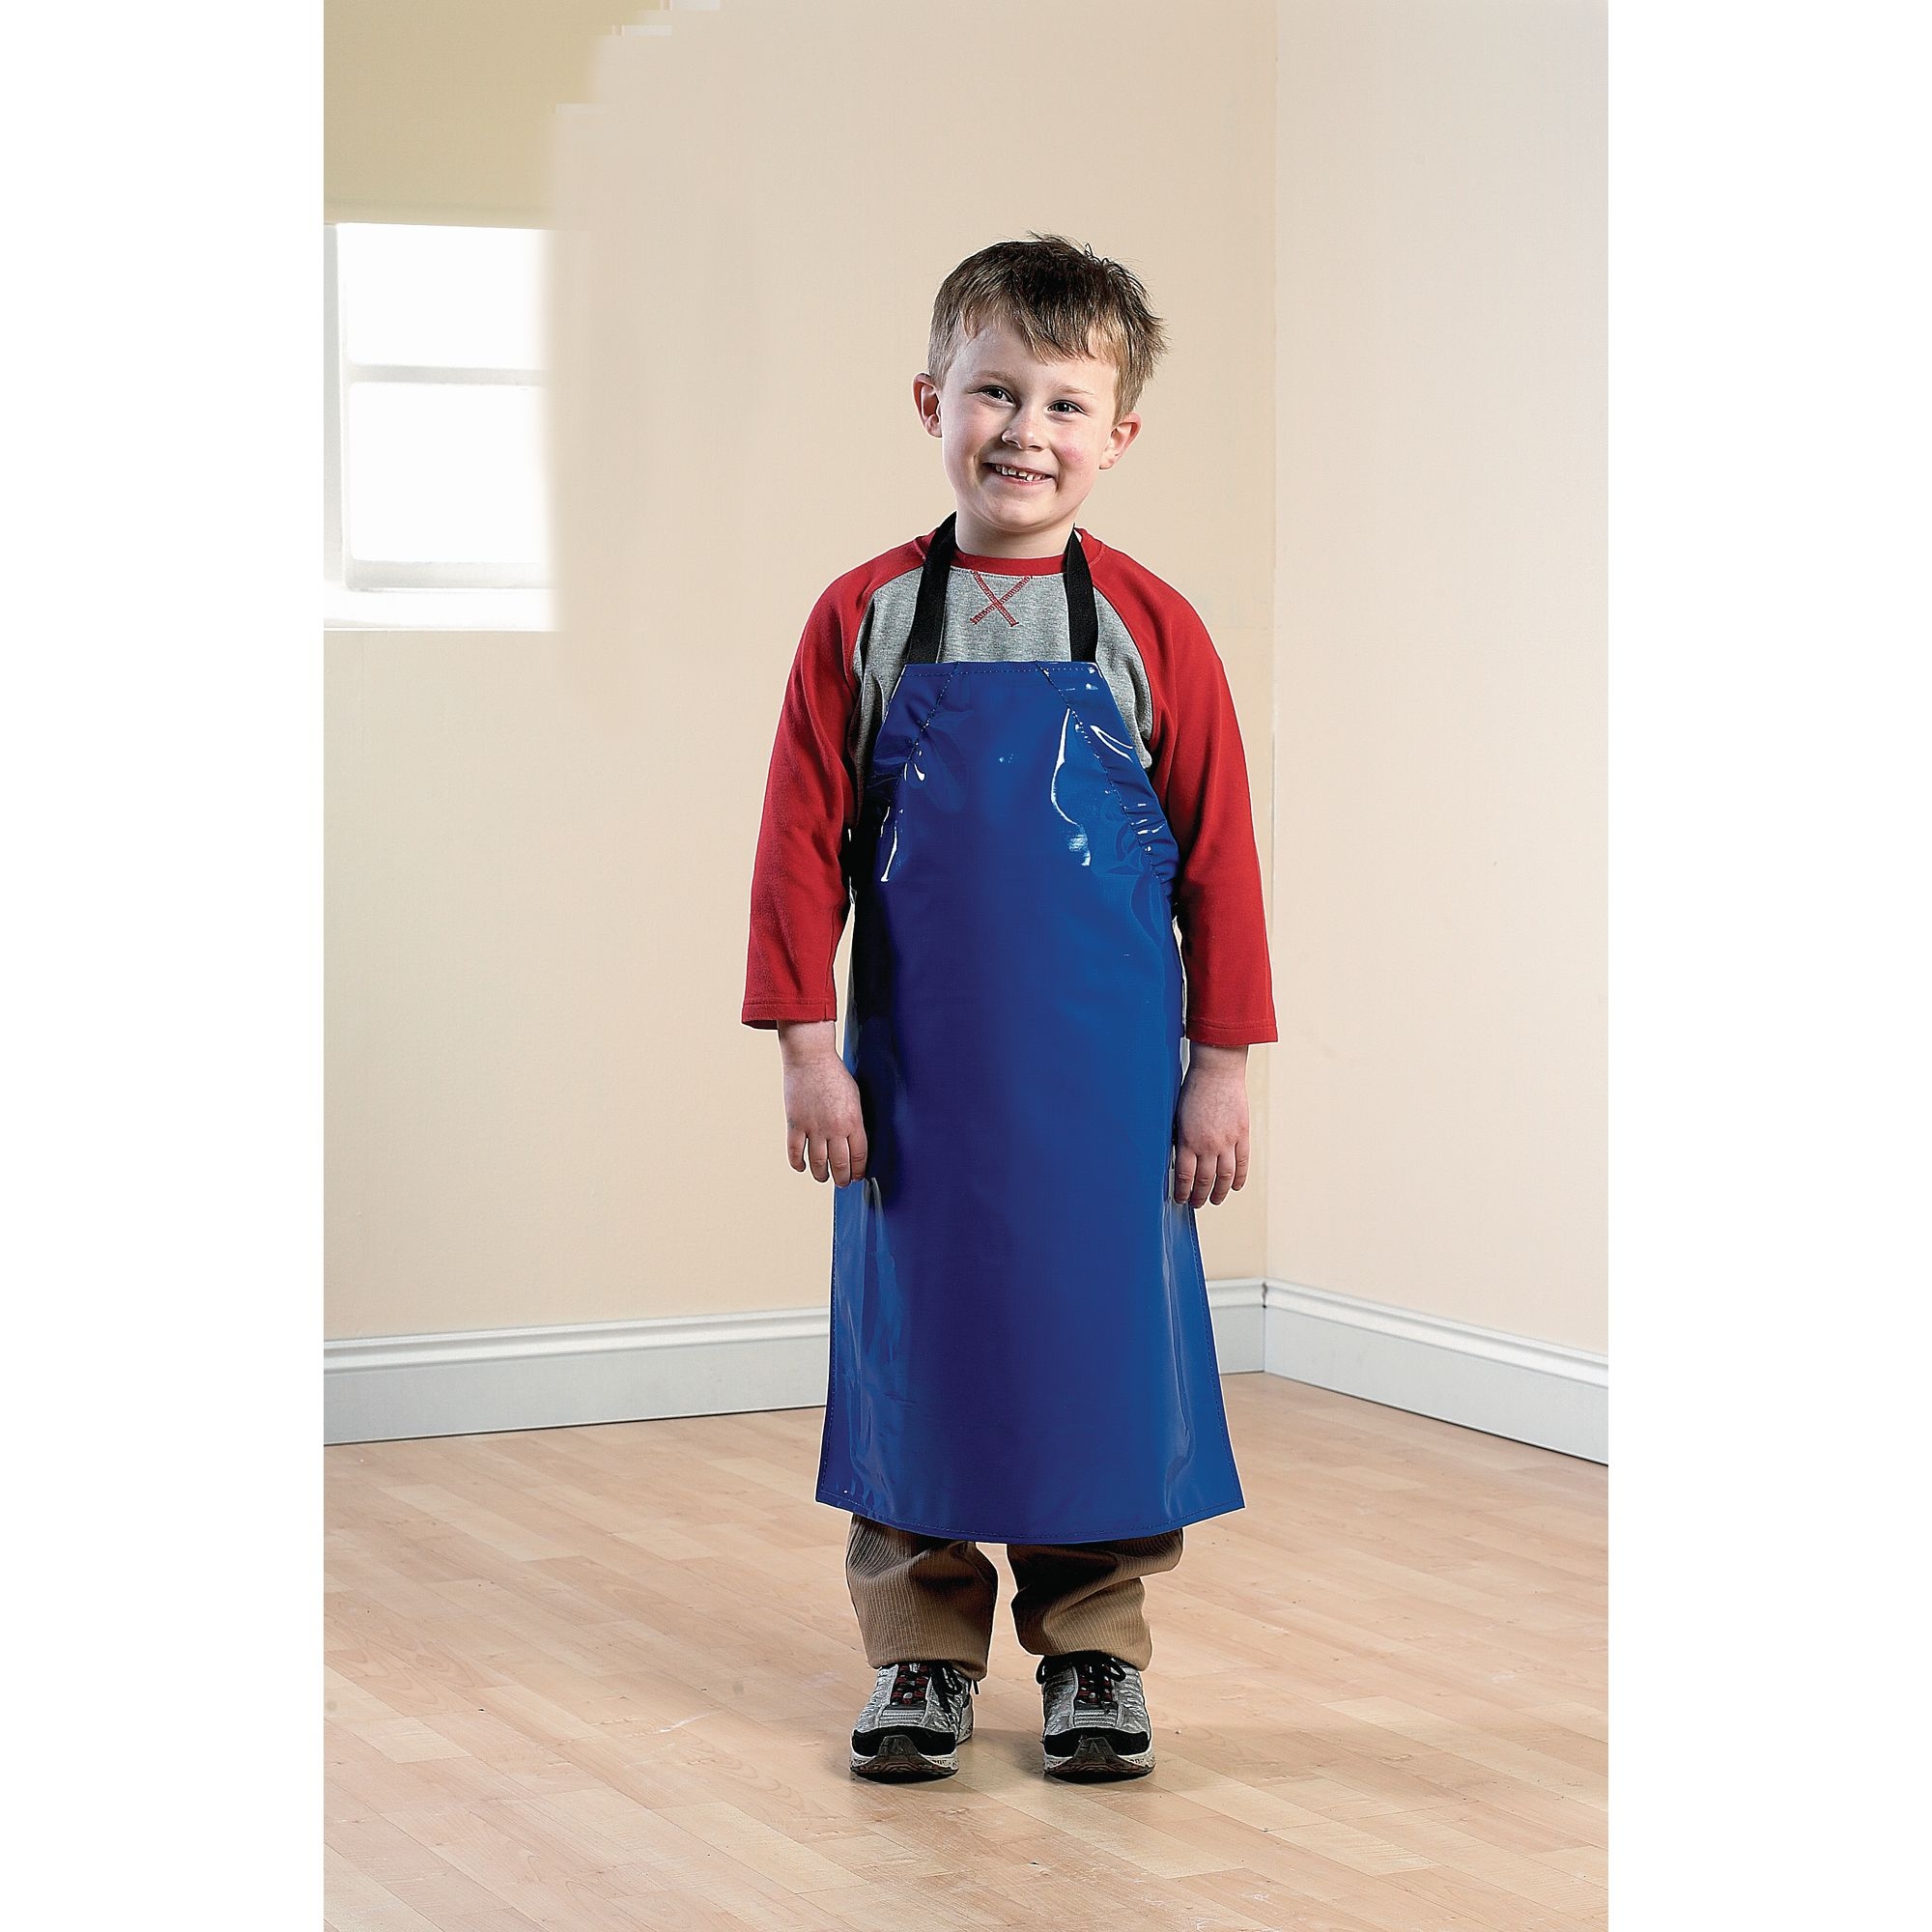 Aprons & Table Covers